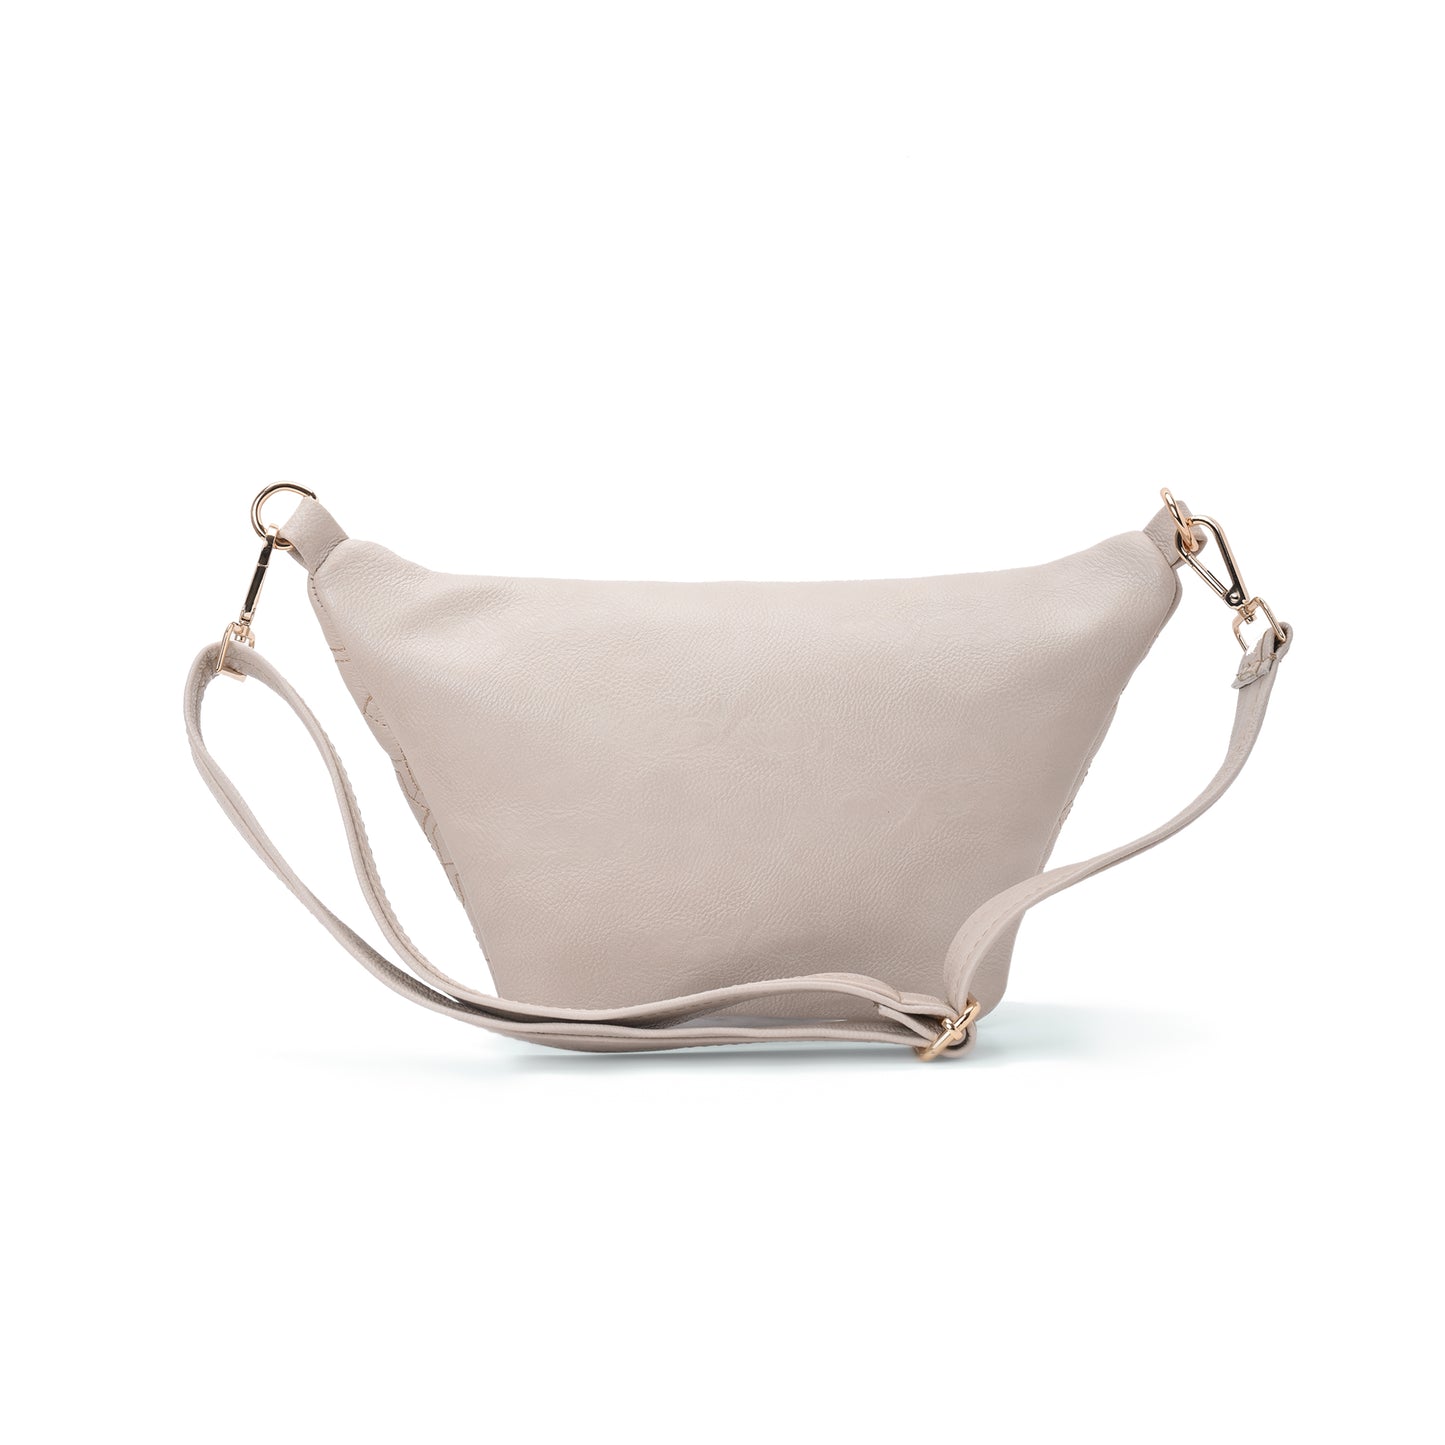 Fanny pack - Cream color with Mamluki Pattern- Code 1003